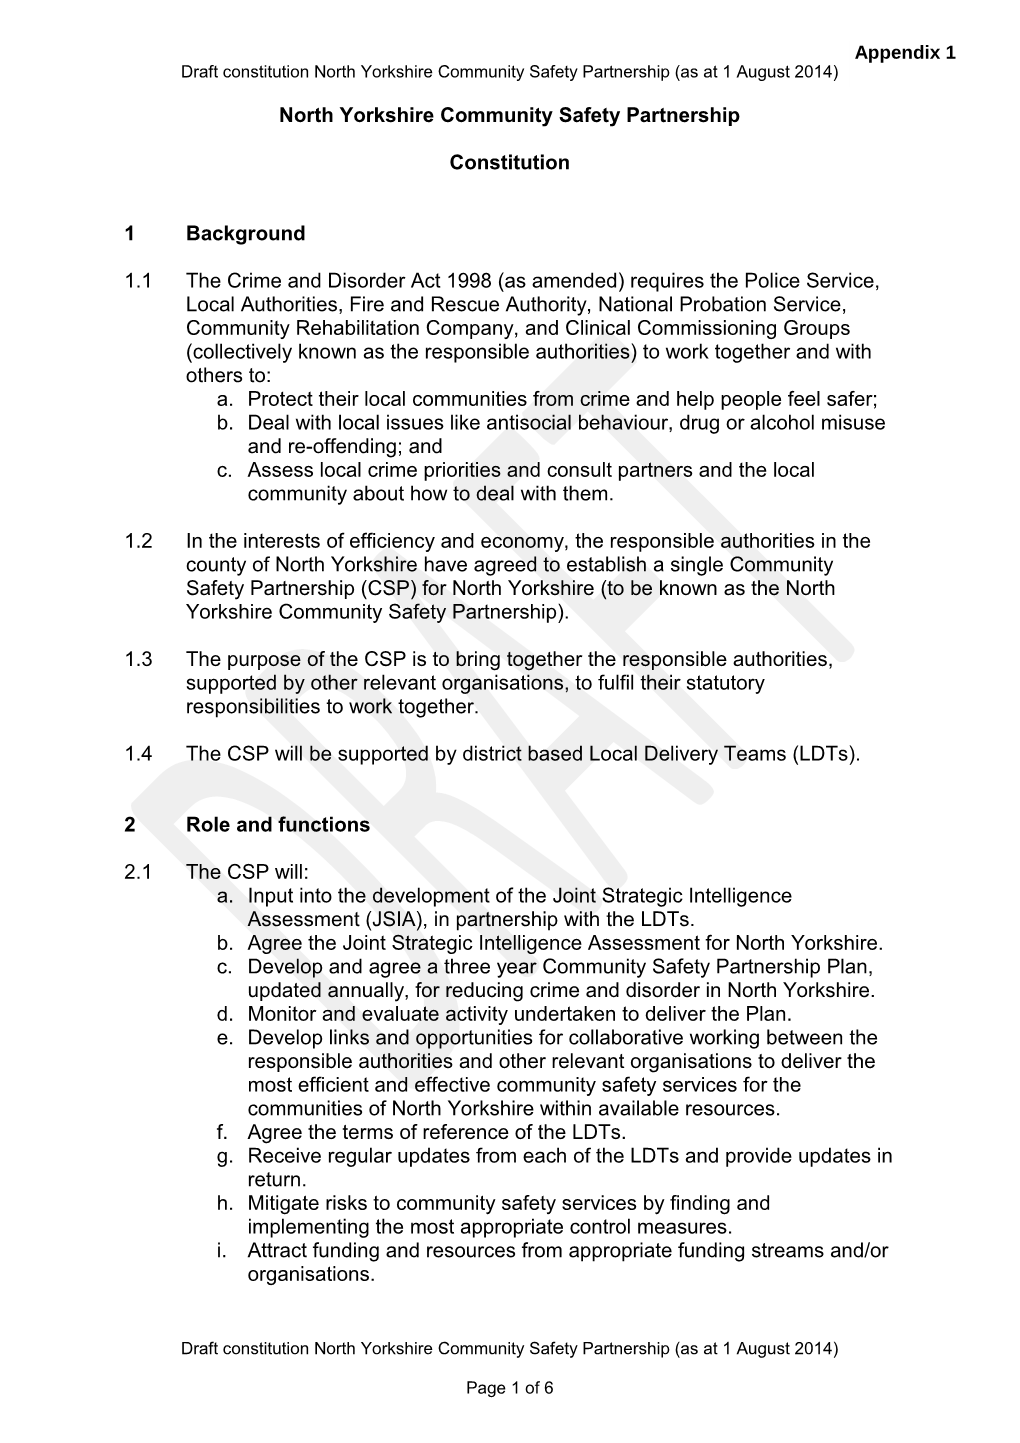 Draft Constitution North Yorkshire Community Safety Partnership (As at 1 August 2014)